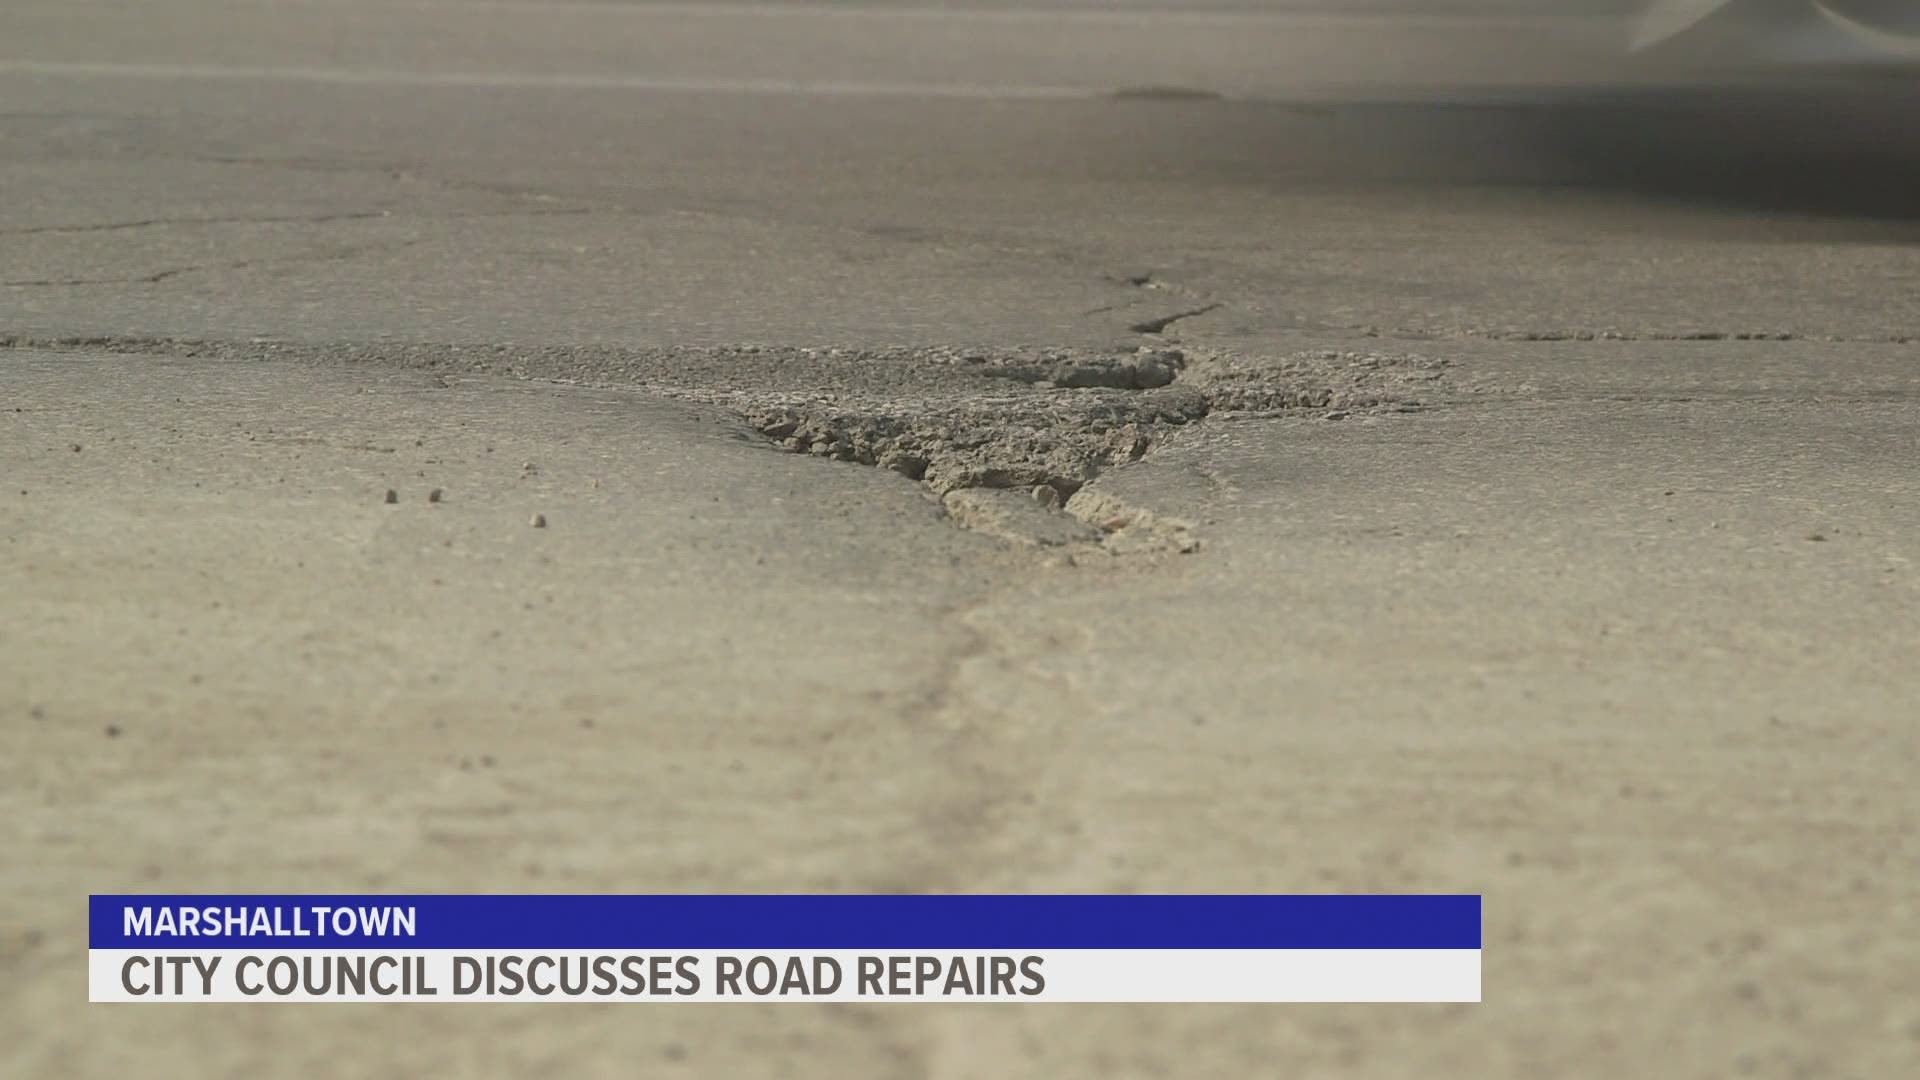 Public Works Director Justin Nickel says the cost to maintain roads in the city costs $3 million every year.